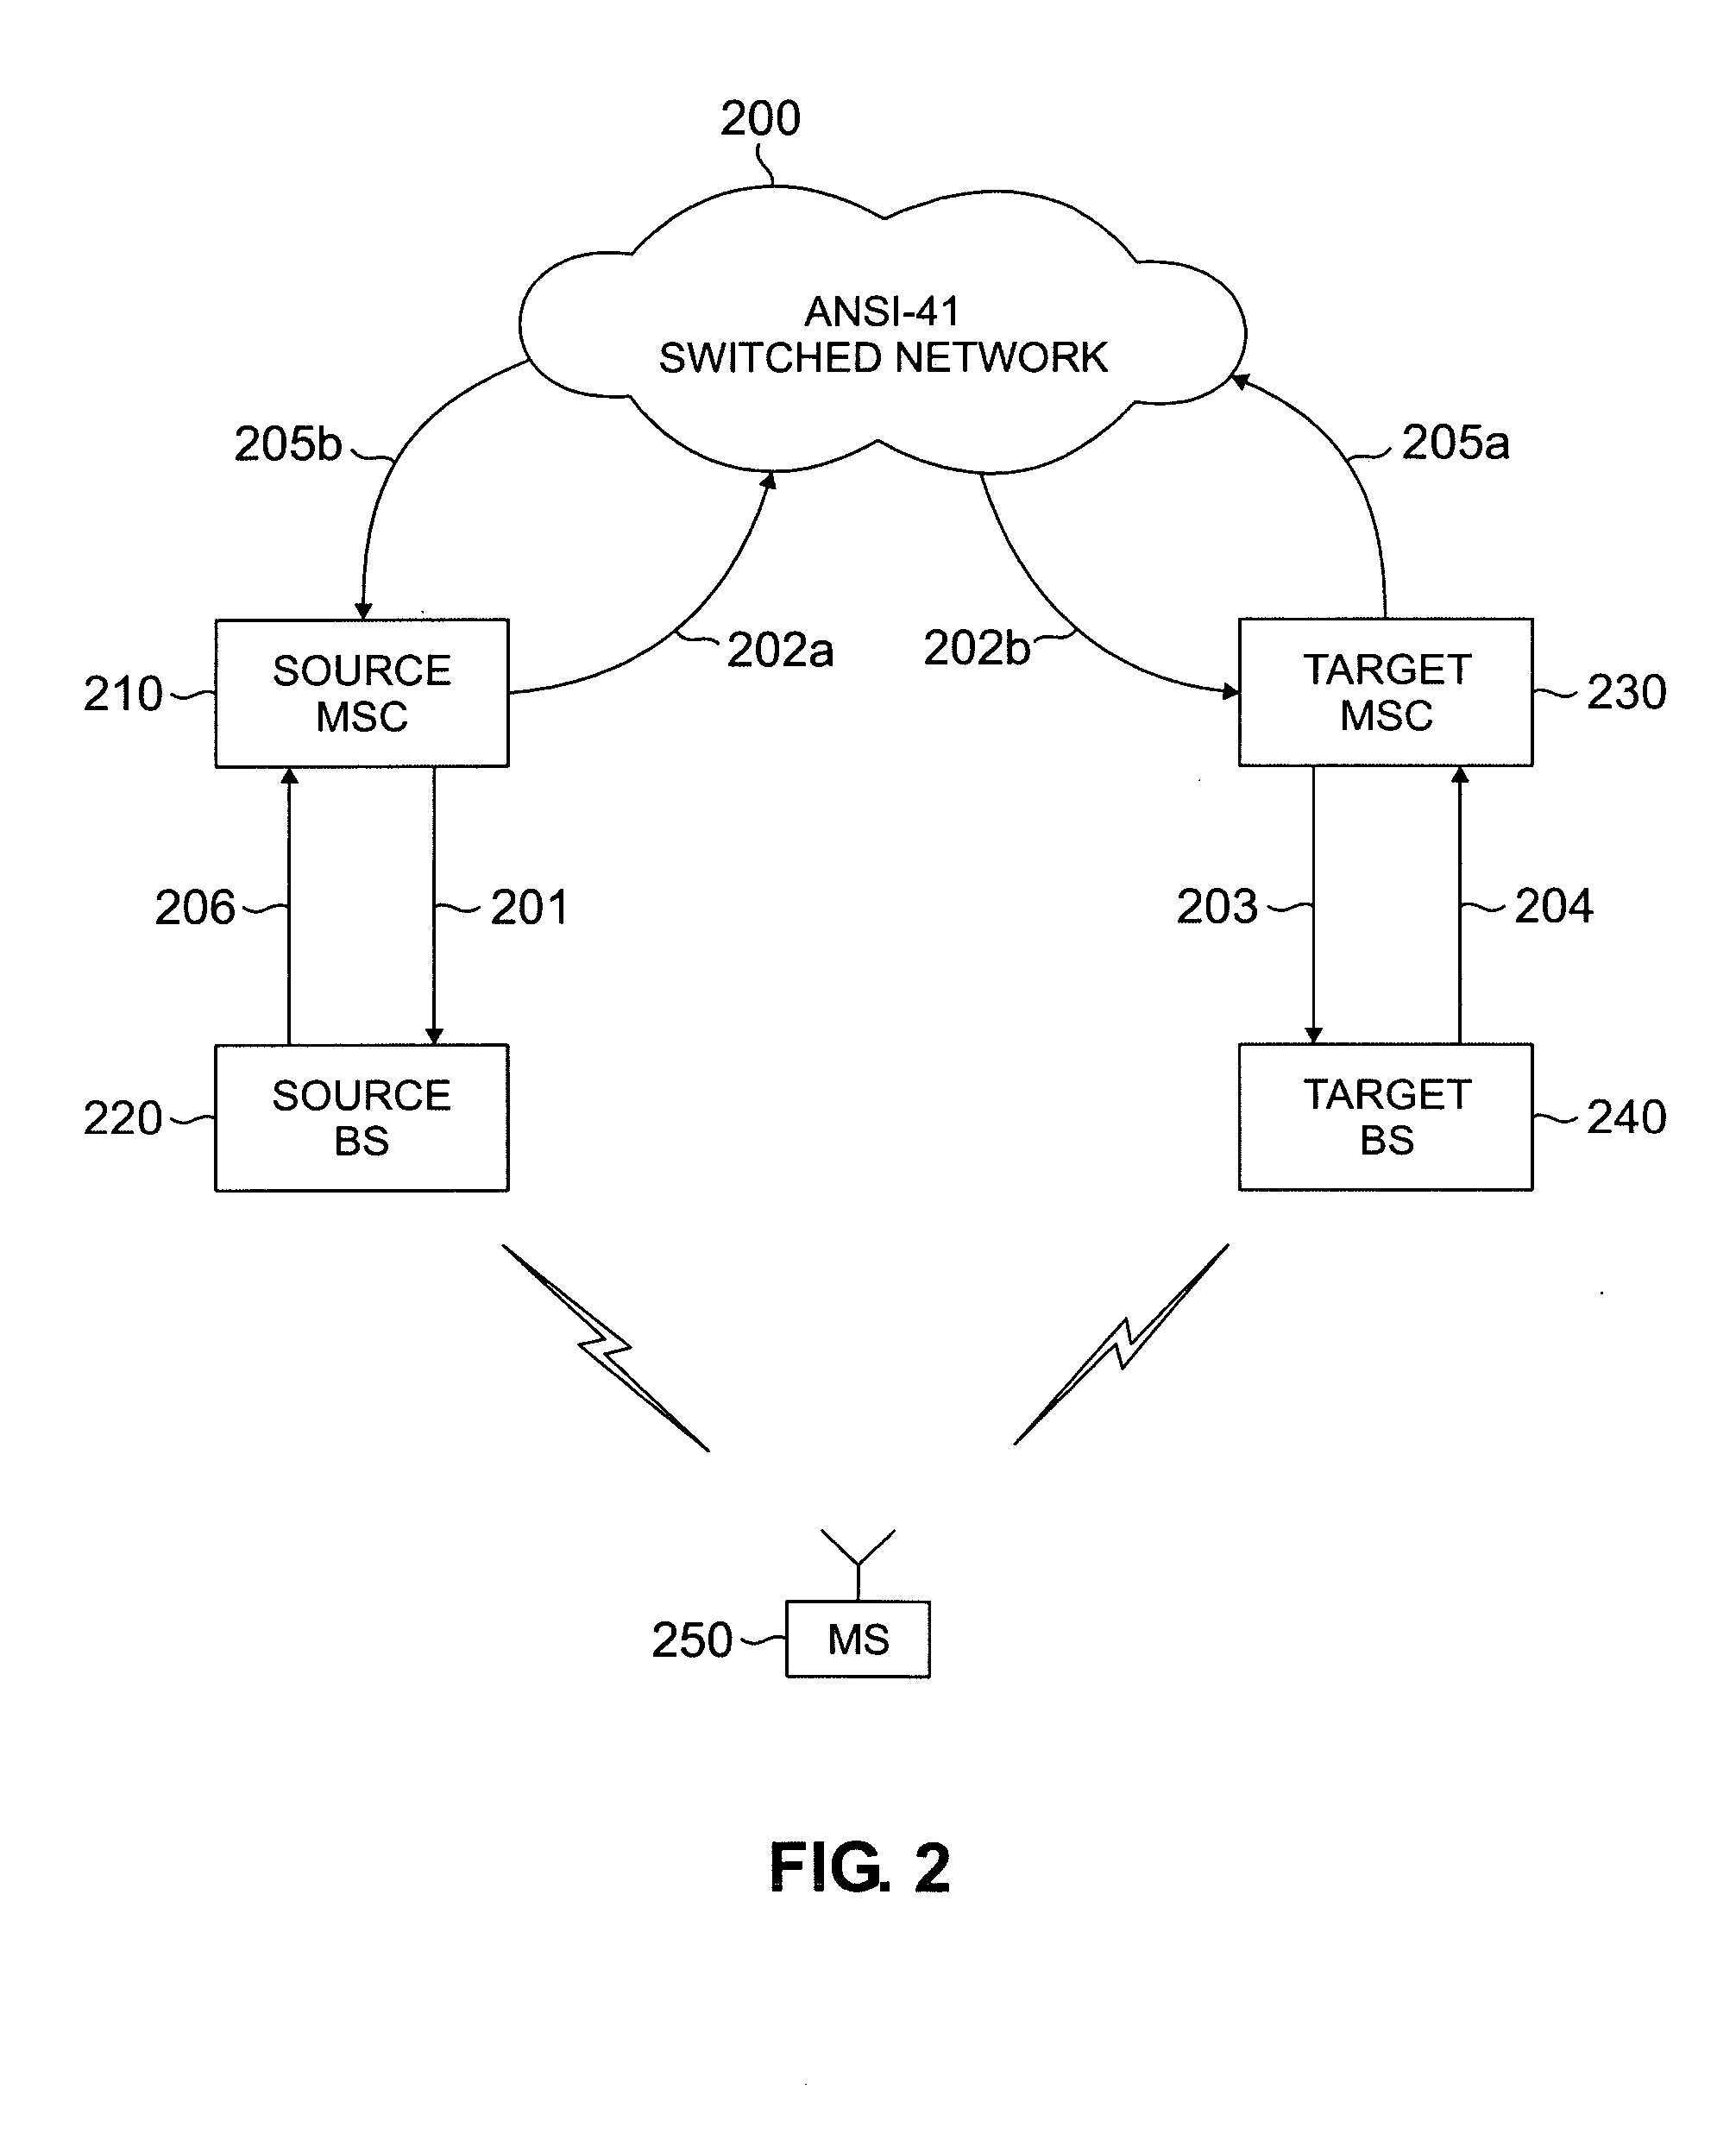 Efficient network messaging protocol for performing hard handoffs in a wireless network